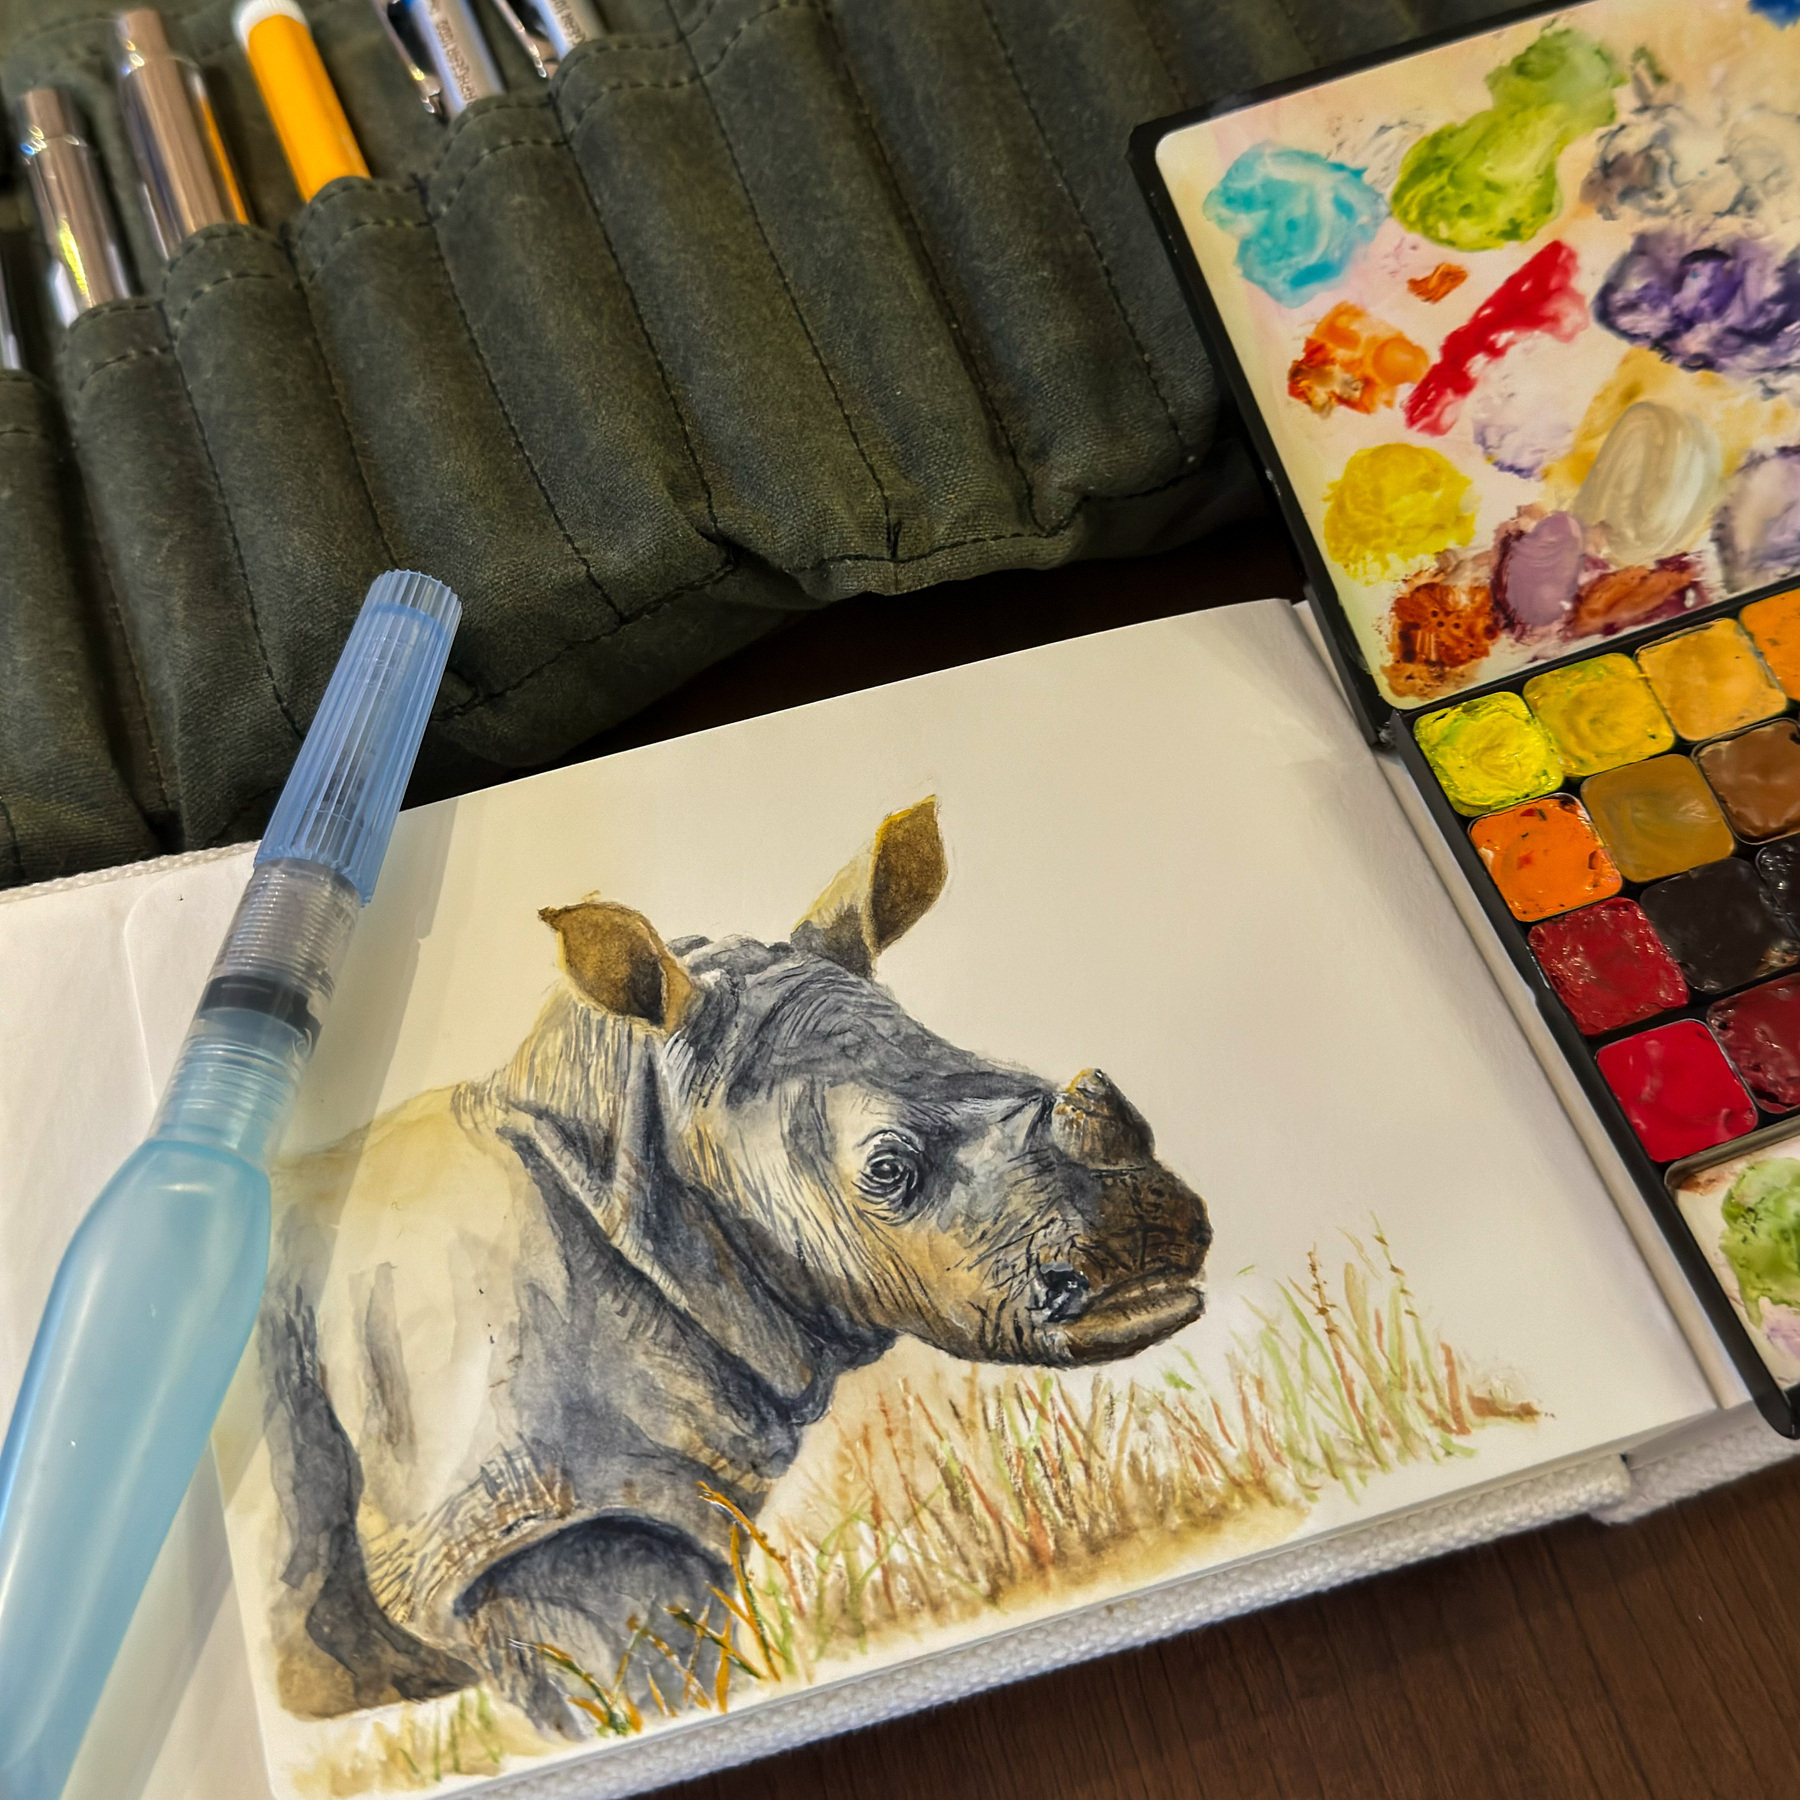 Watercolor painting of a baby rhino lying in the grass, with a palette of vibrant colors and watercolor brushes nearby.